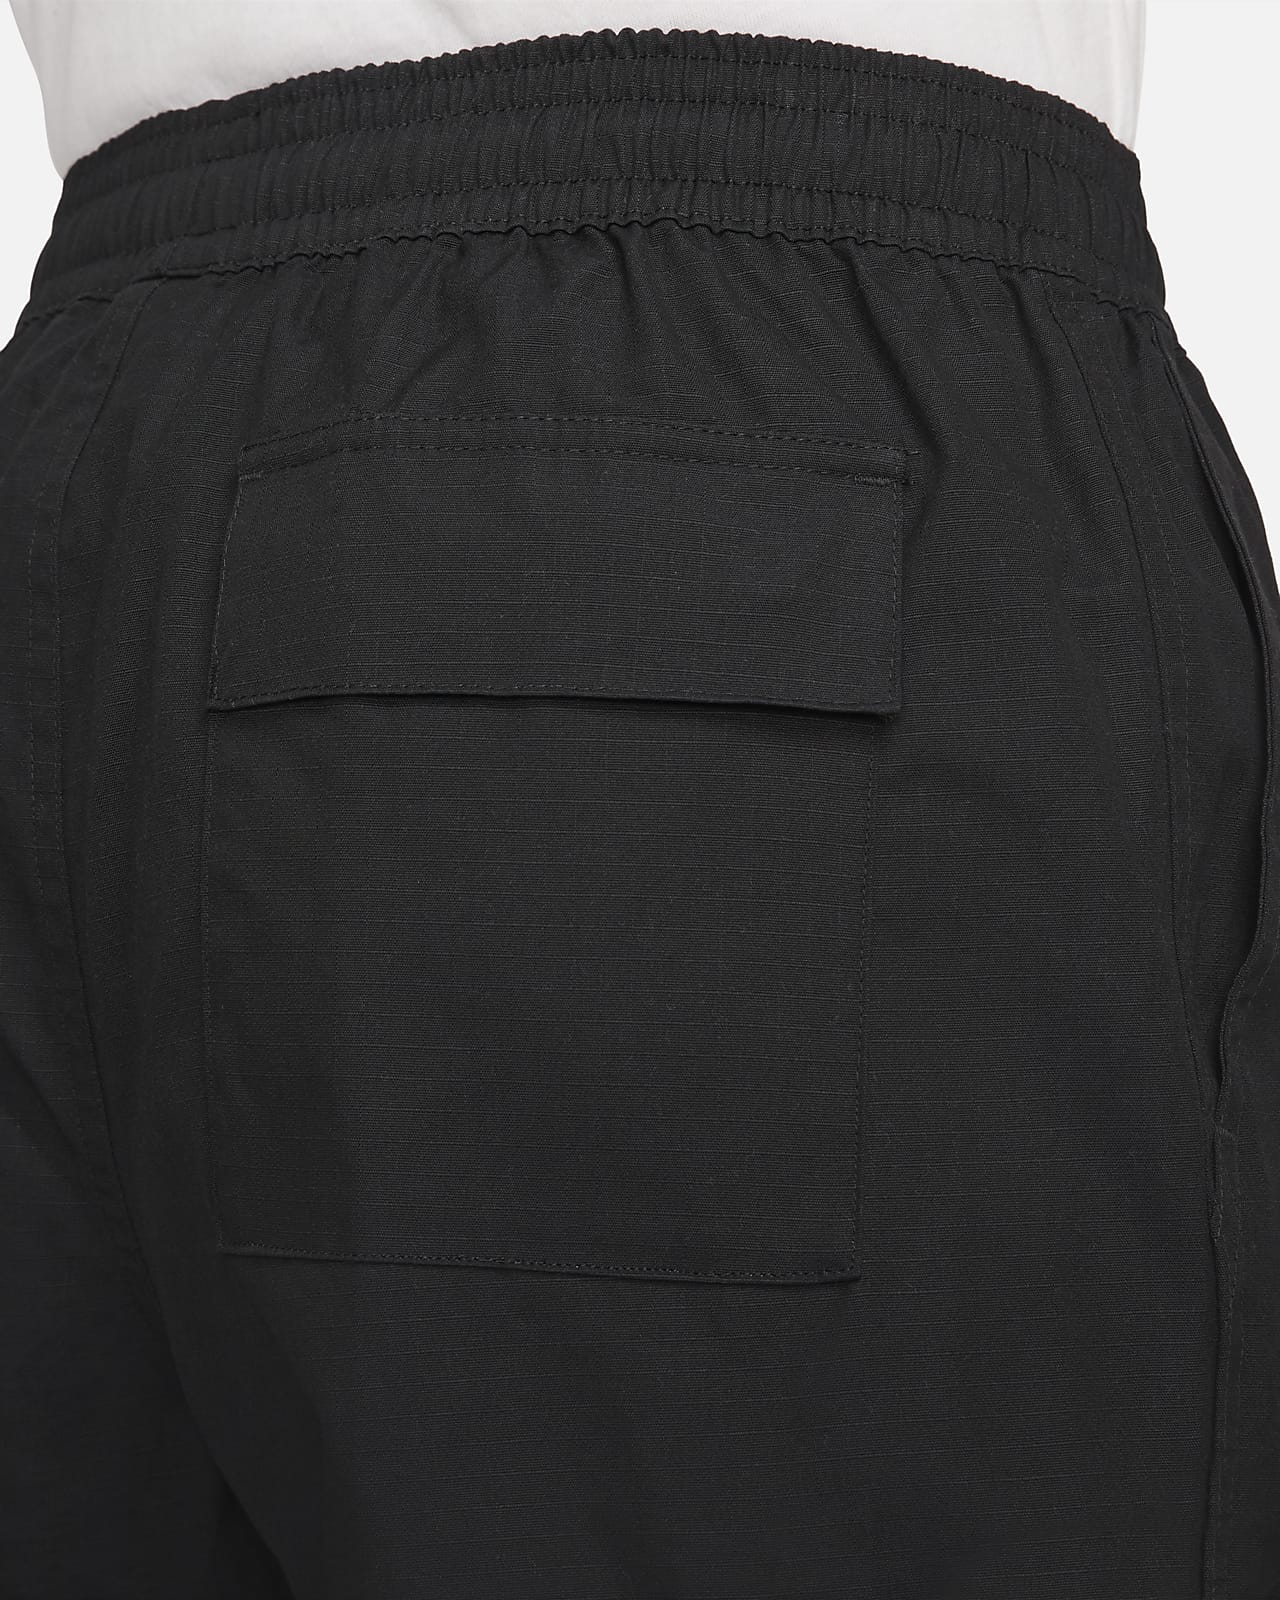 Men S Soften Washing Double Cargo Patched Pocket Zipper  Fake Fly Curve  Drawcord Waistband Trousers  Pants  China Elastic Waistband Pants and  Slim Pants price  MadeinChinacom